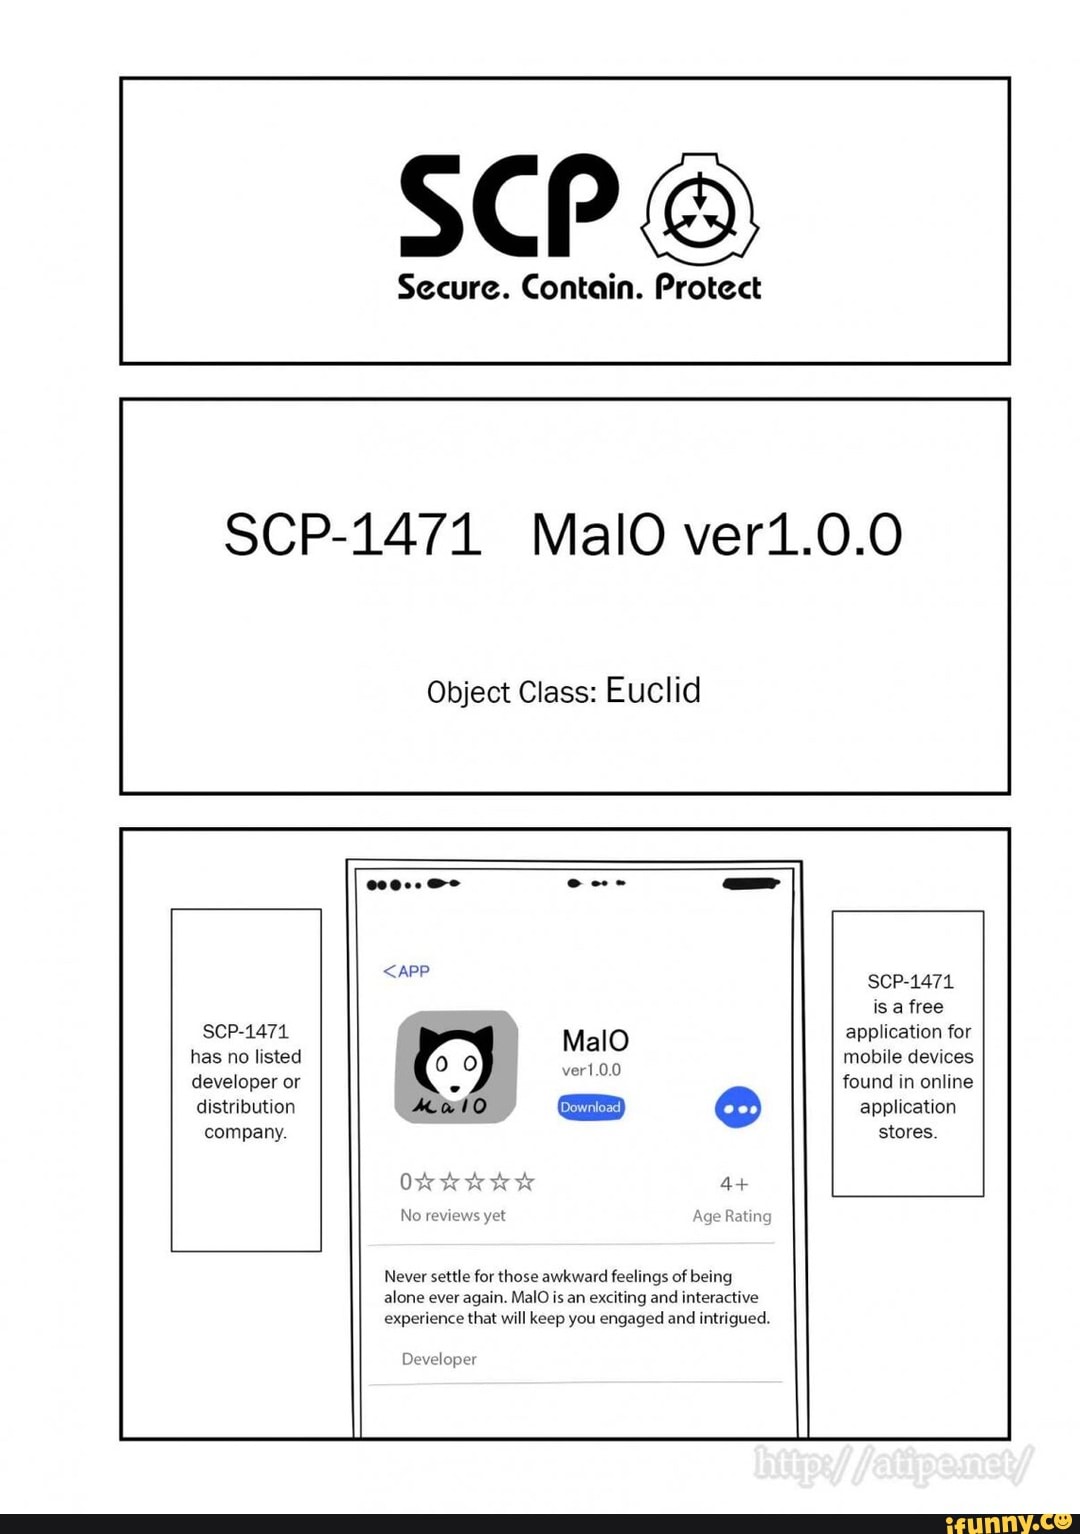 About: MalO ver1.0.0 (Google Play version)